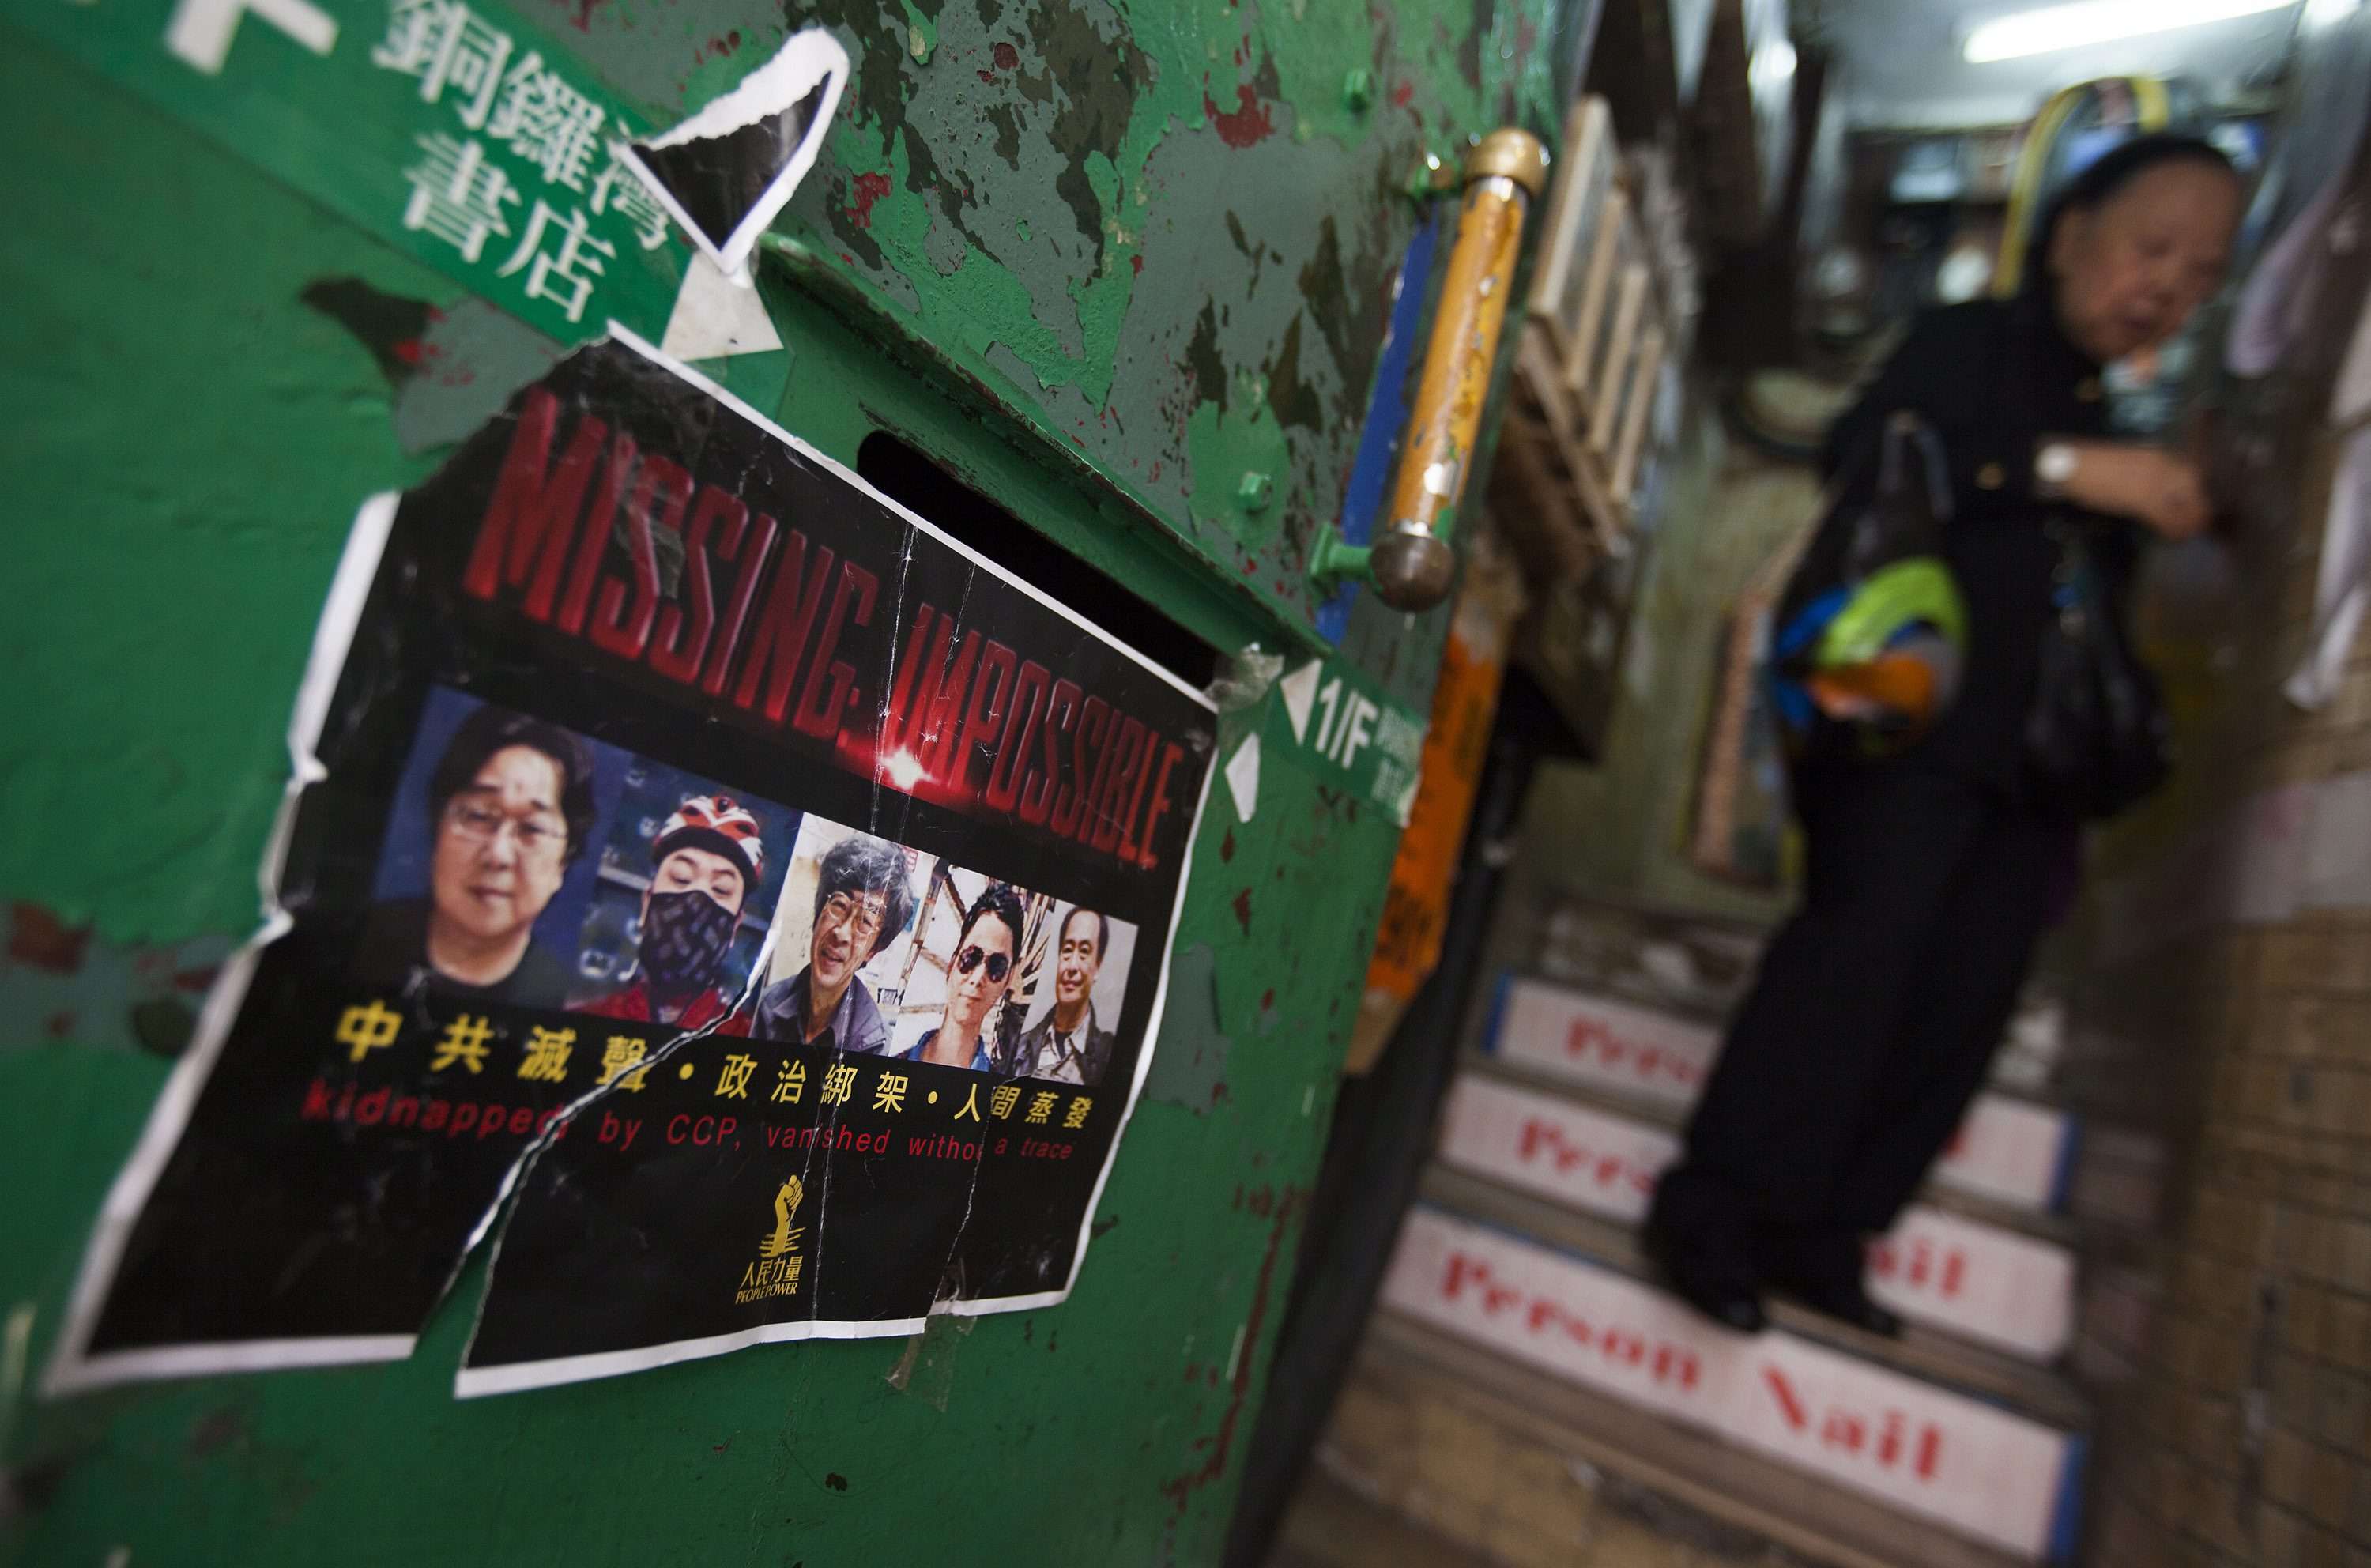 A poster supporting the missing booksellers is seen on the stairs leading up to Causeway Bay Books, just days after Lee Po, the proprietor of the shop, reappeared in Hong Kong. Photo: EPA